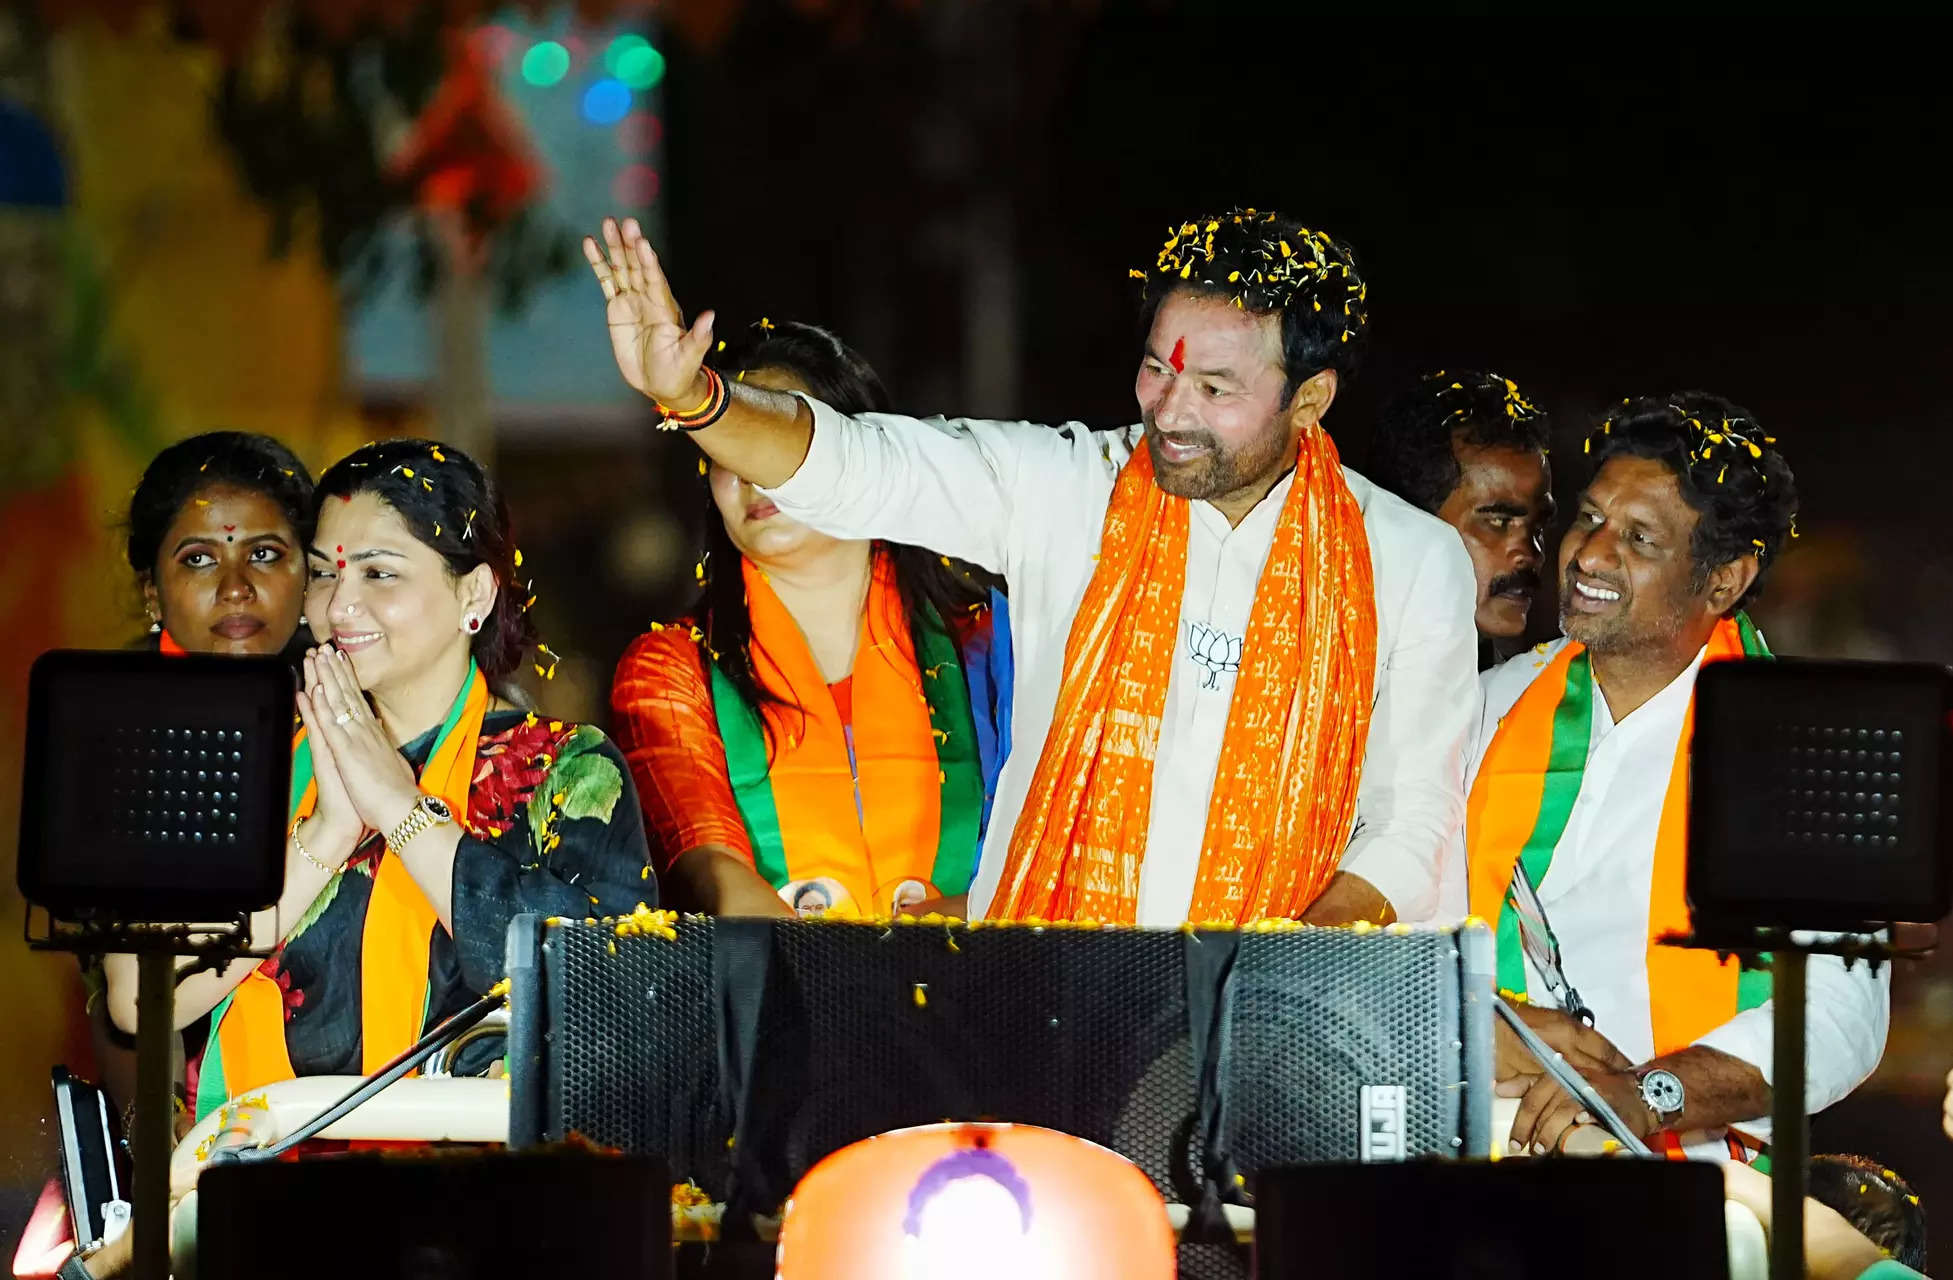 Lok Sabha Polls: Secunderabad, a Congress-BJP stronghold, set for a three-way contest as BJP aims for a hat-trick 